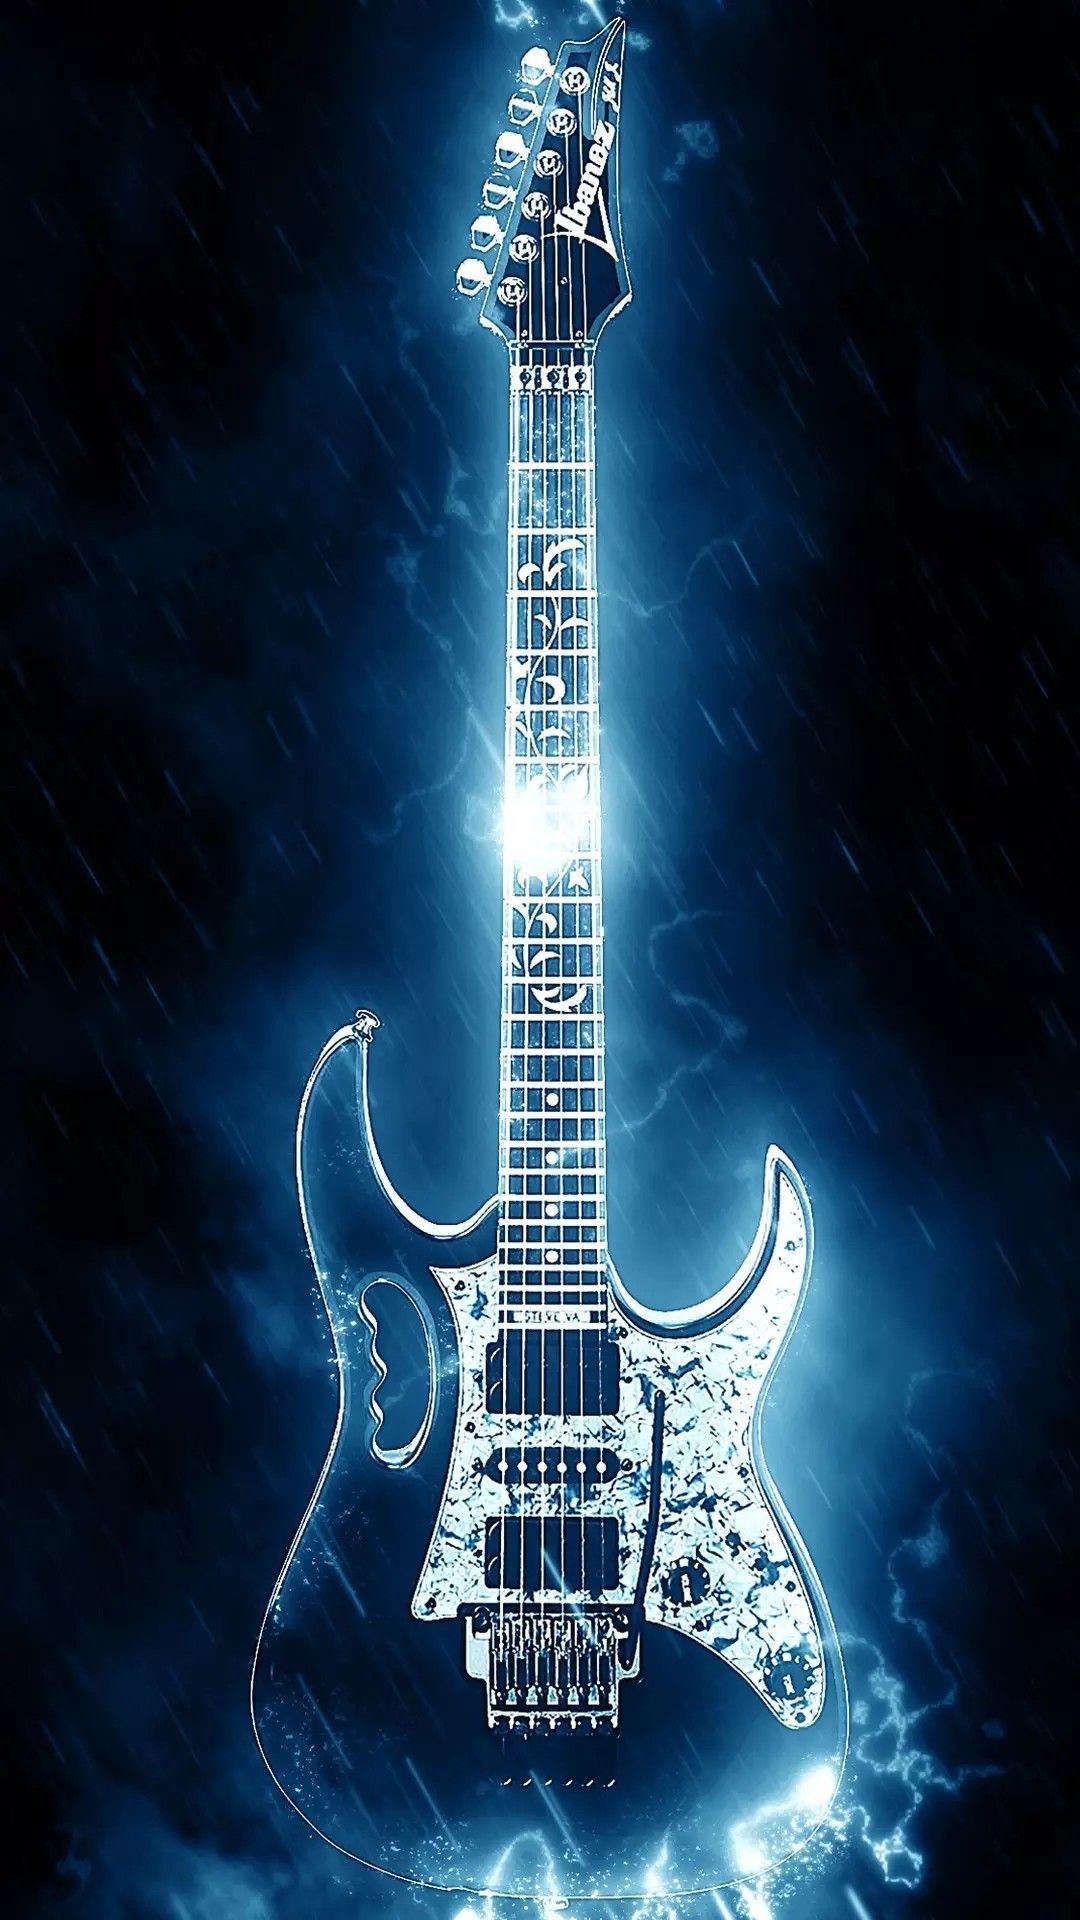 Music Aesthetic Wallpaper For Your IPhone Guitar. Music wallpaper, Heavy metal guitar, Guitar